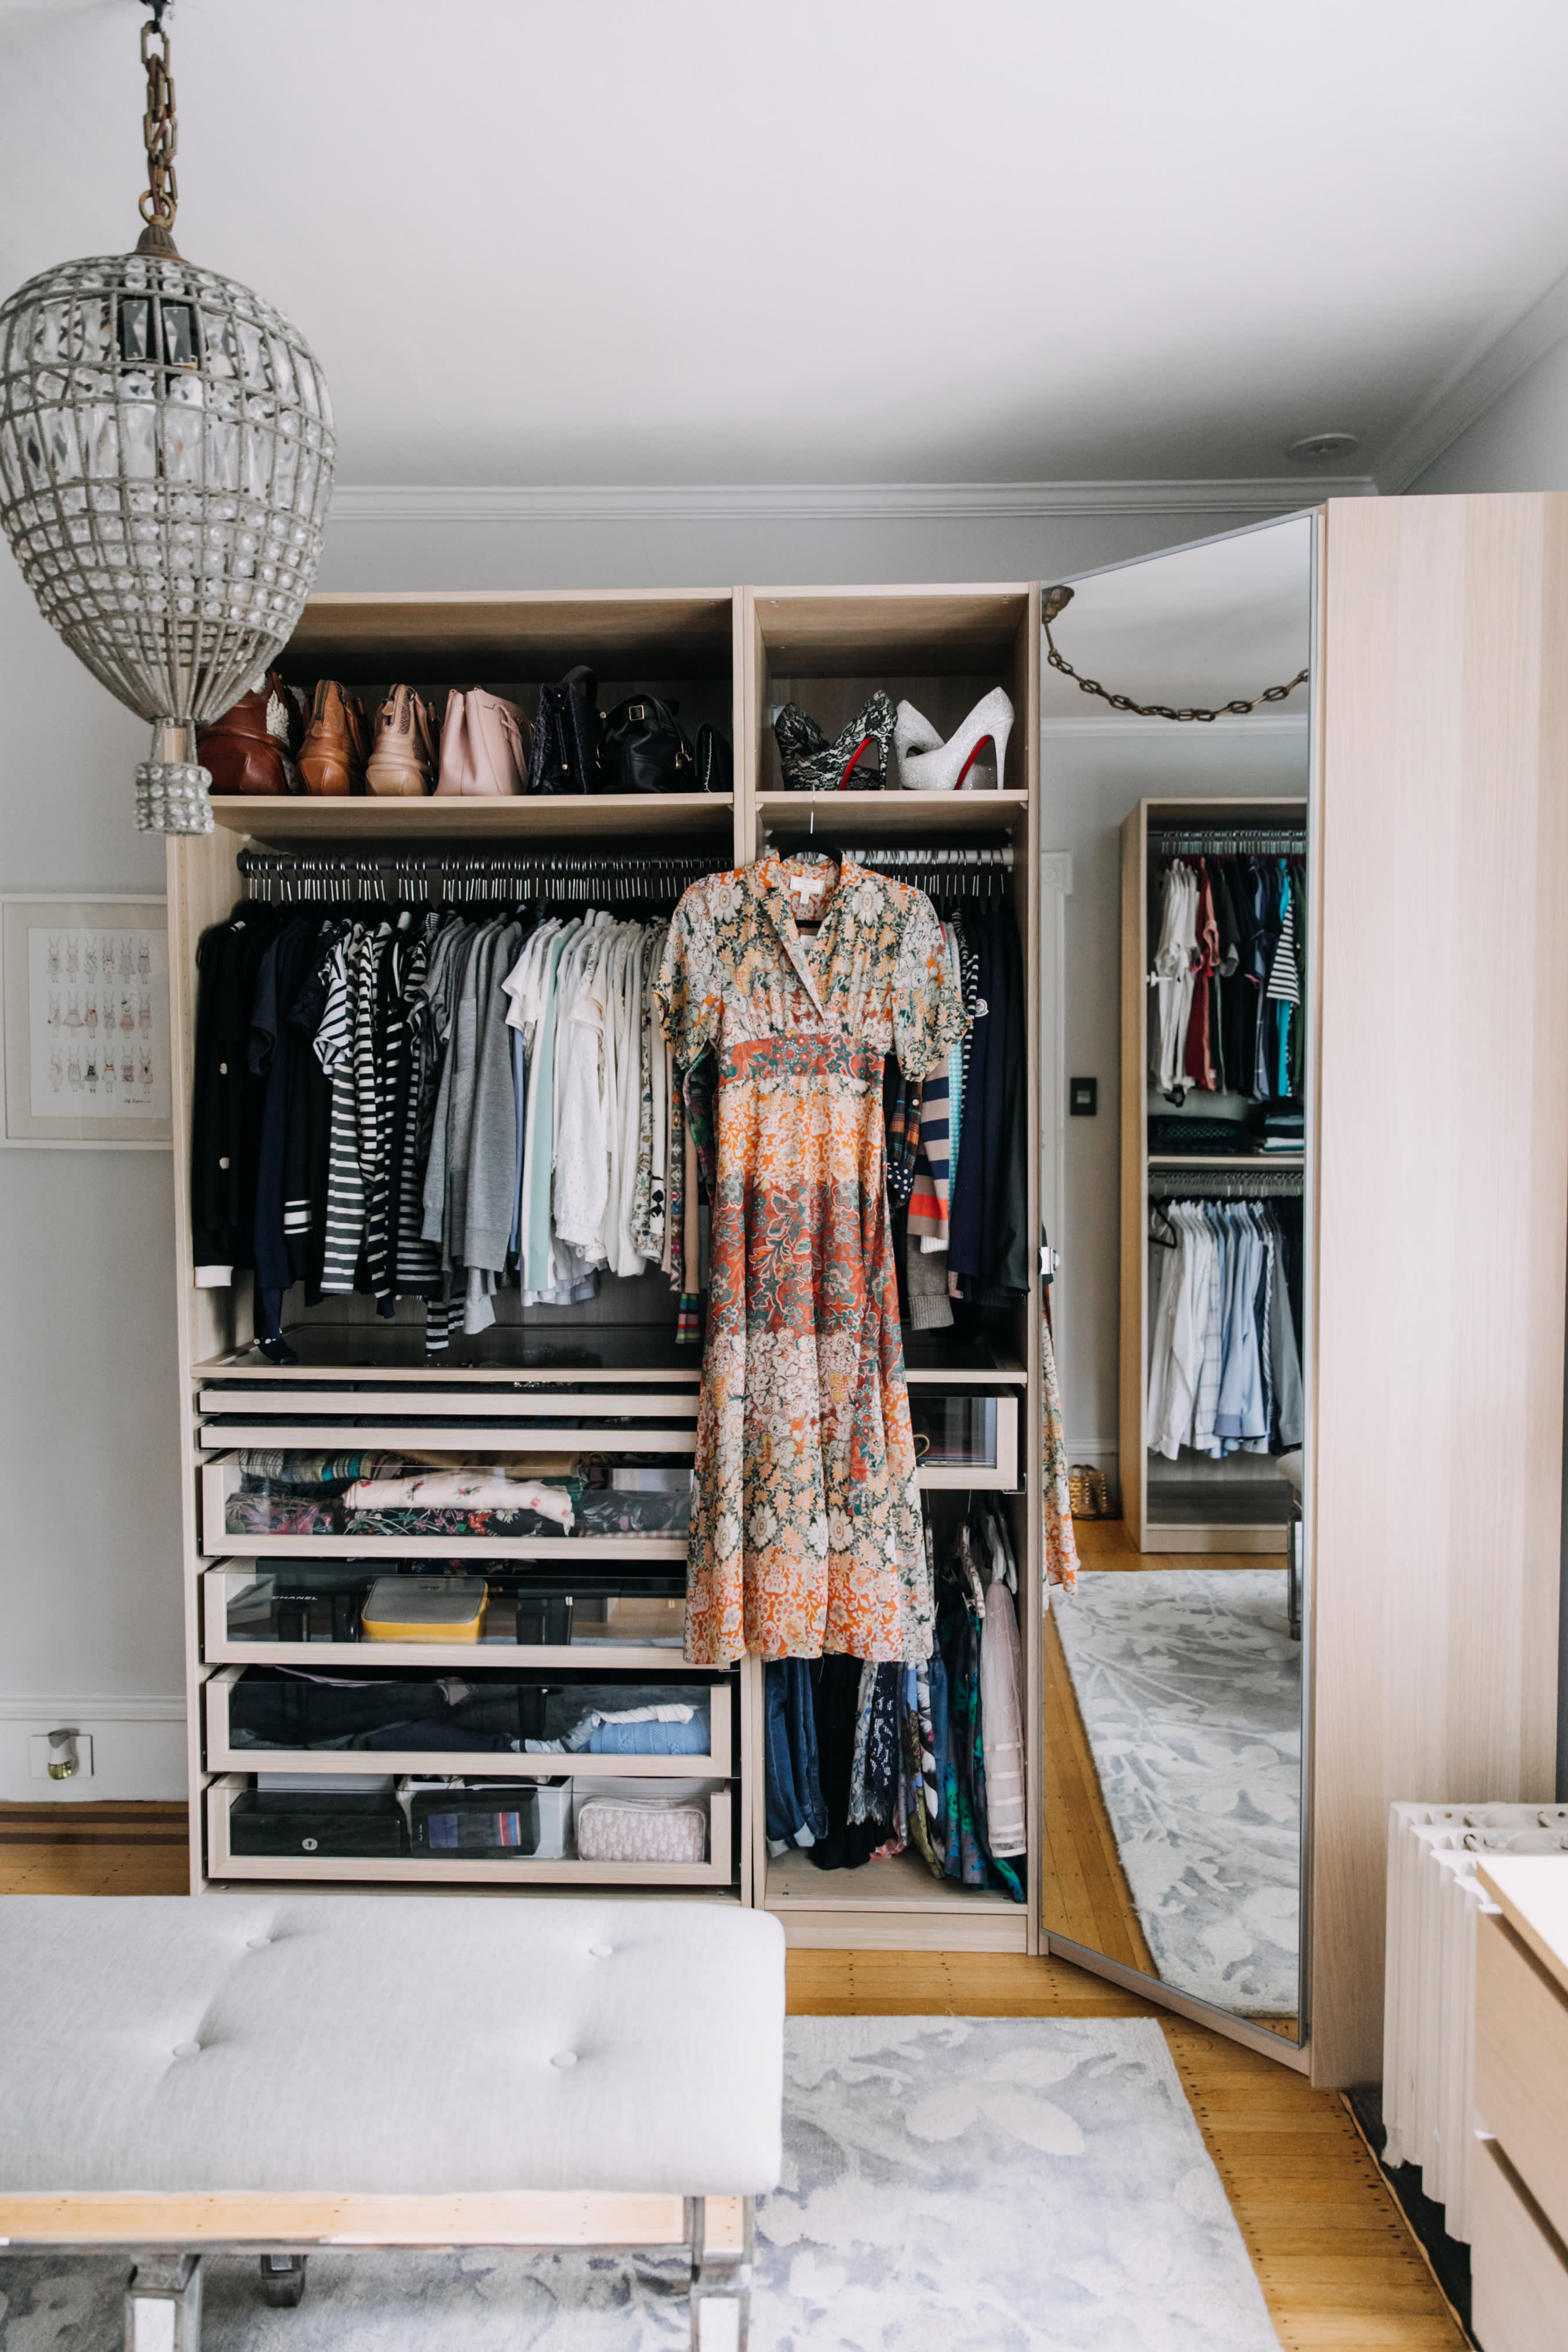 A Personal Stylist's Organized, Tiny 10-Square Foot Closet